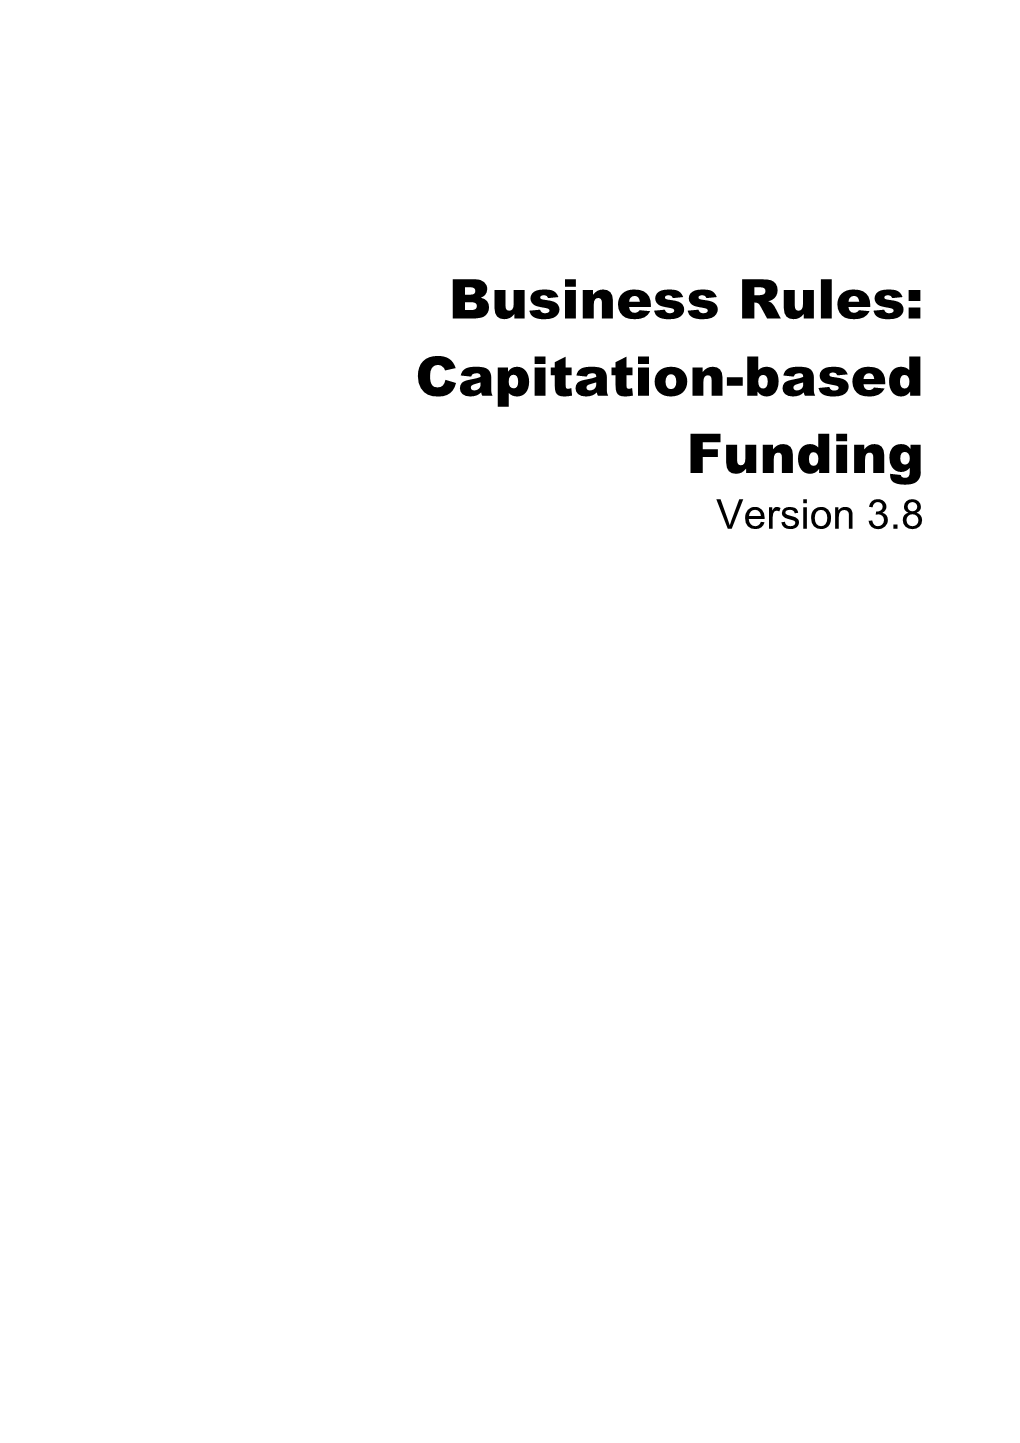 Business Rules: Capitation-Based Funding Version 3.8